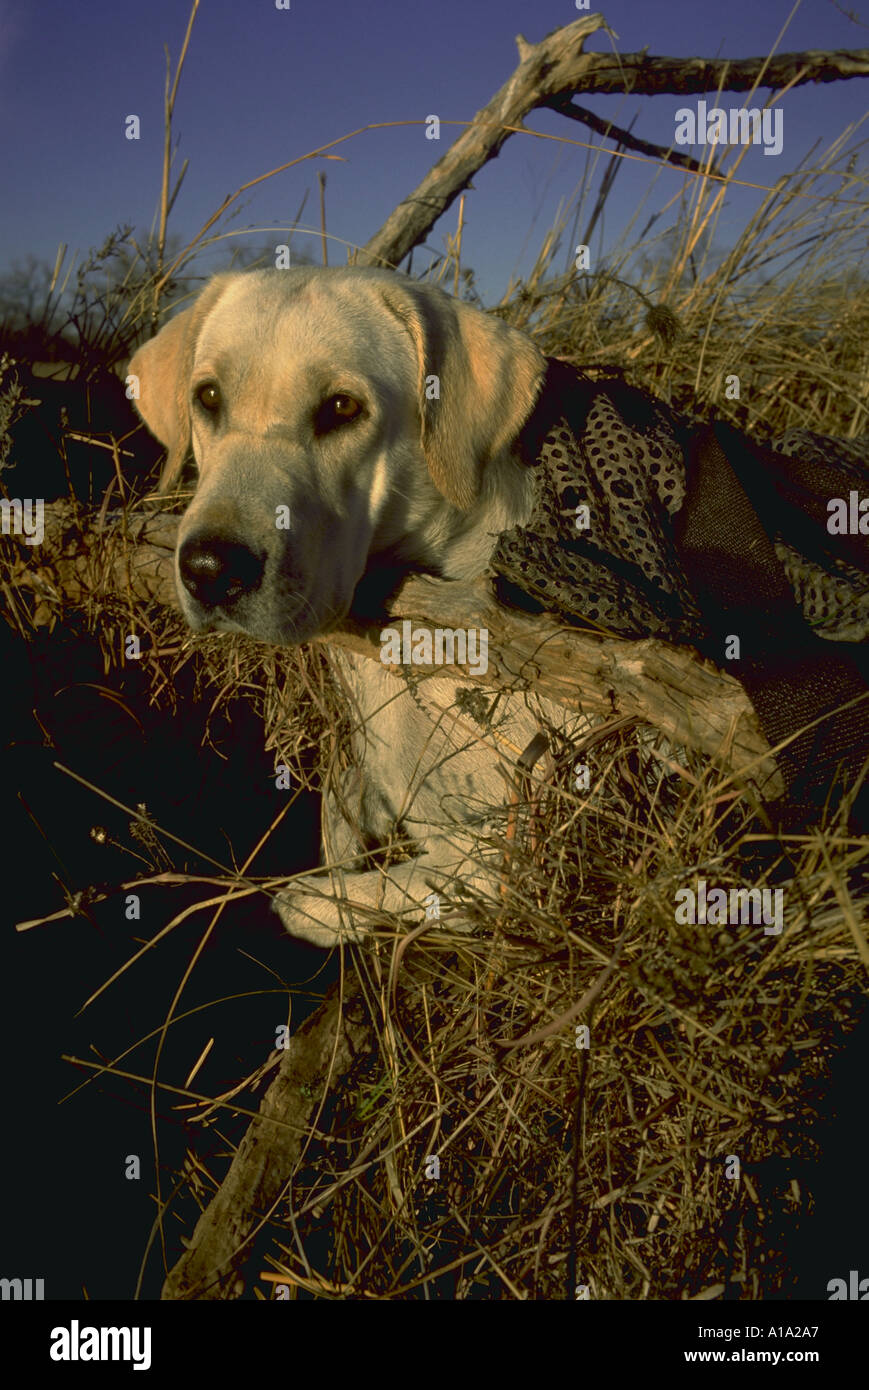 A Yellow Laborador Retreiver camouflaged in a duck blind eagerly awaiting ducks Stock Photo